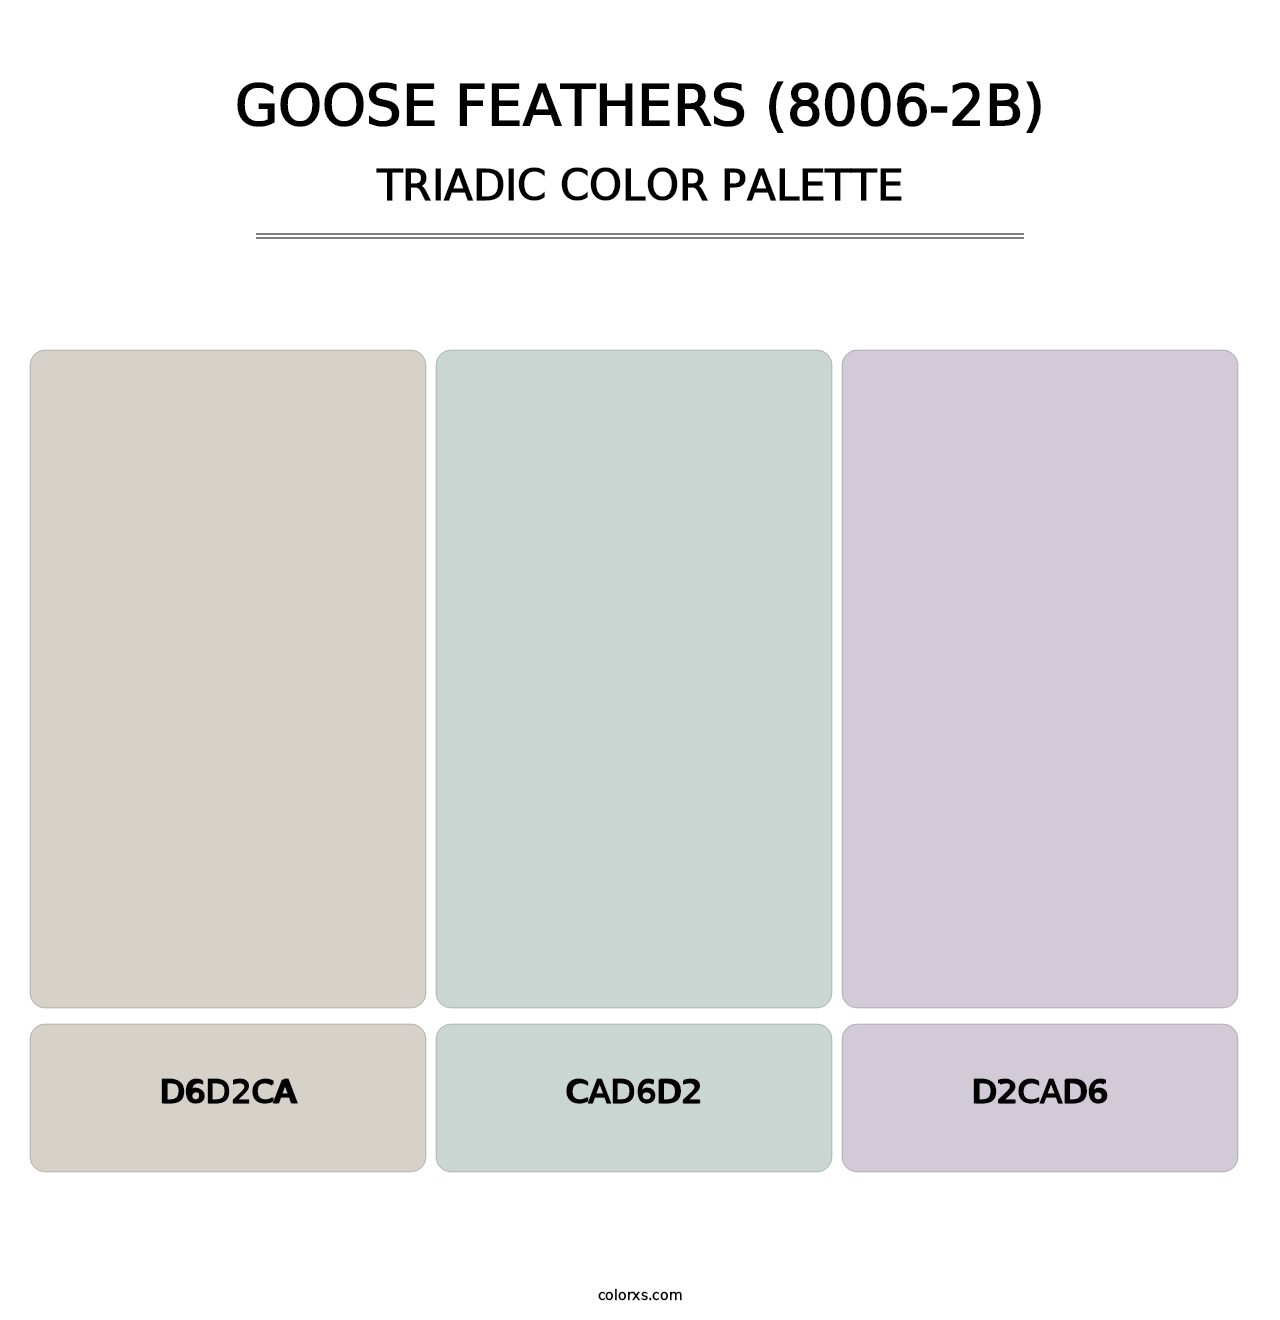 Goose Feathers (8006-2B) - Triadic Color Palette